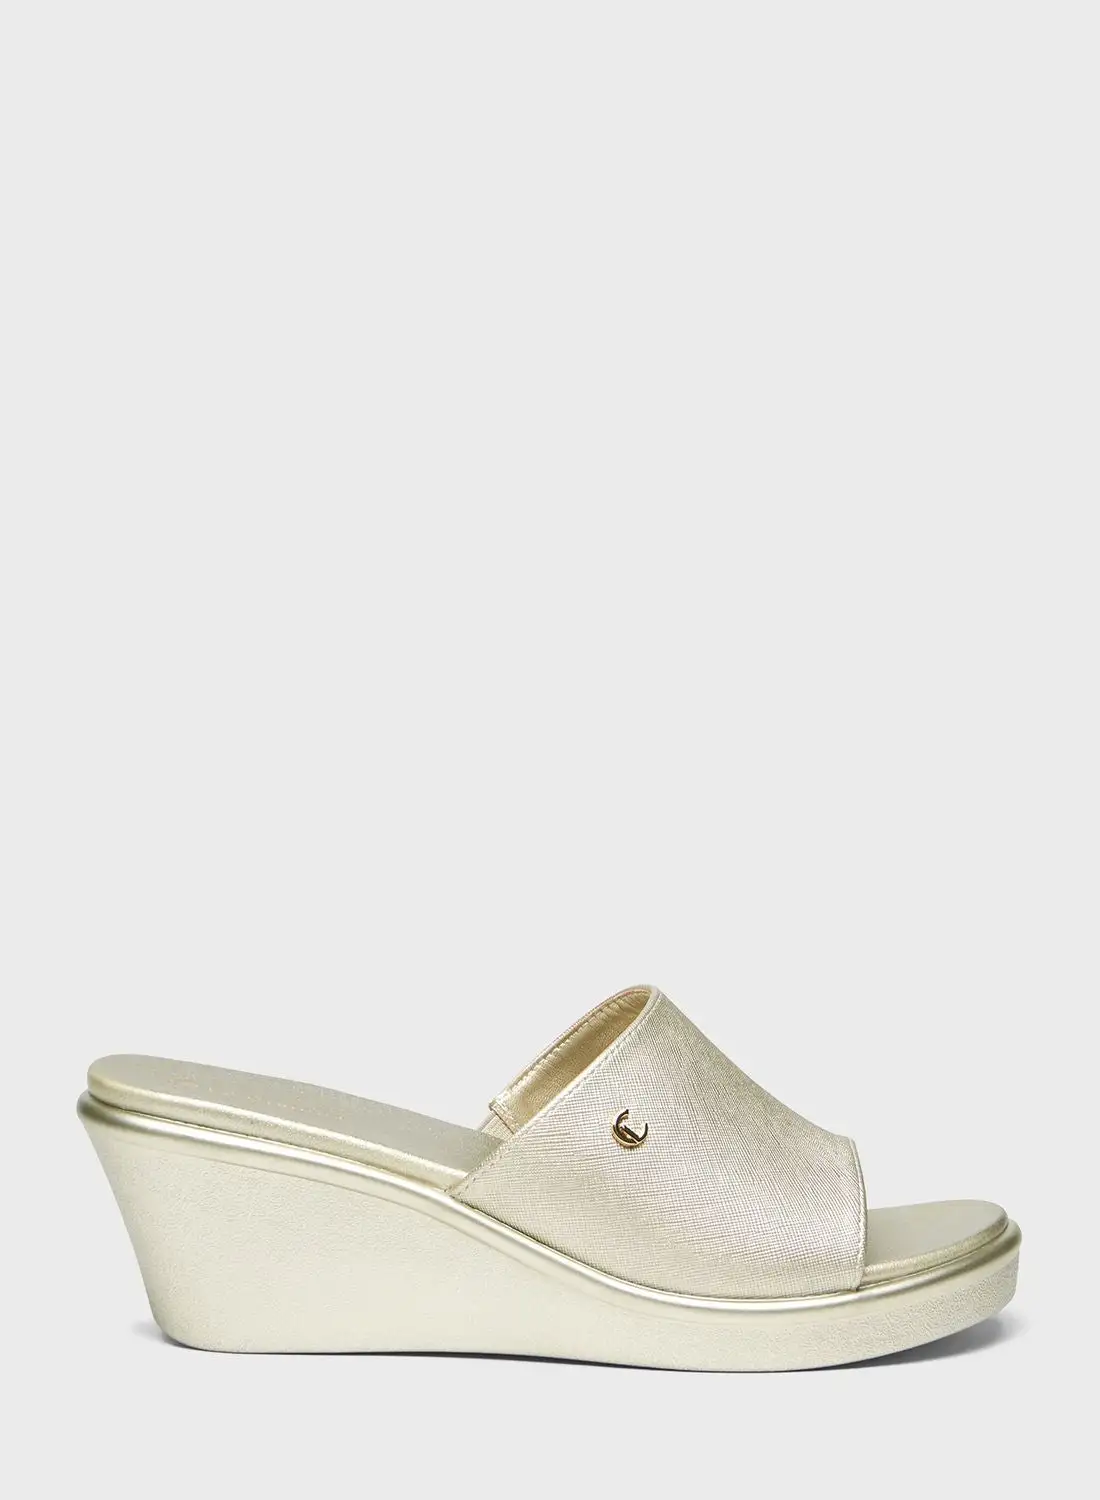 Le Confort One Strap Wedge Sandals